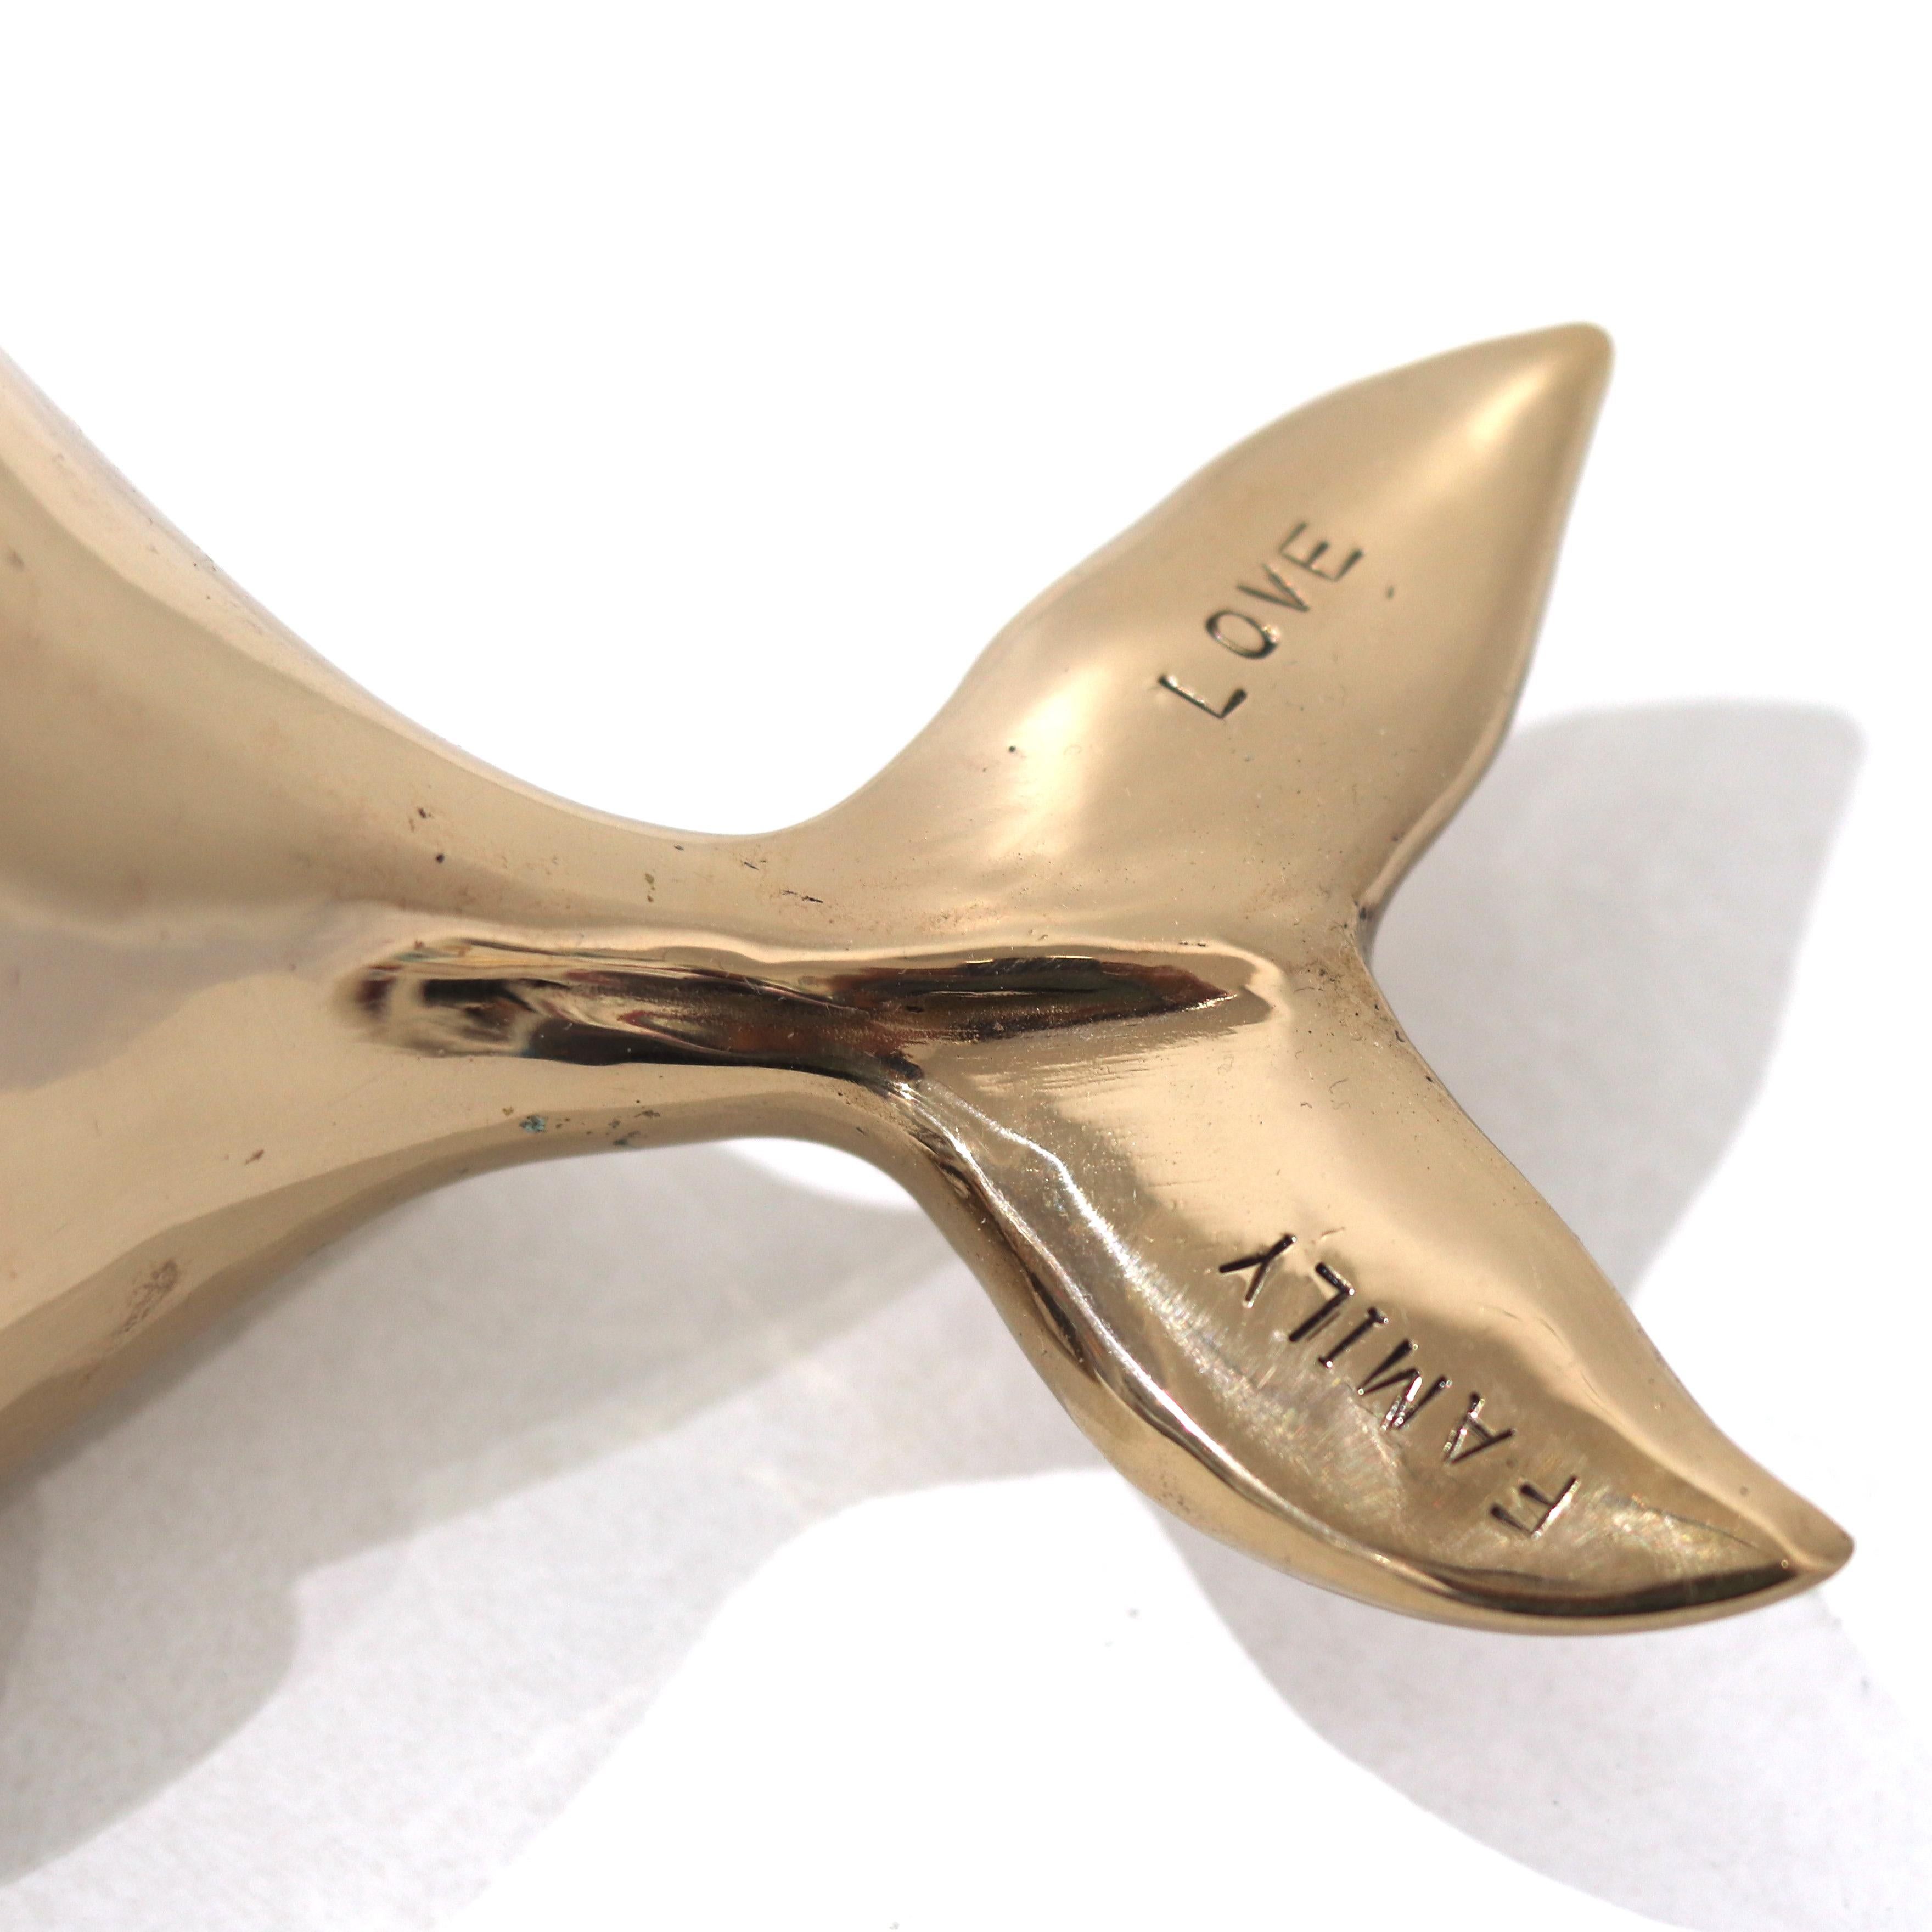 Love (5/18) - Solid Bronze Whale Sculpture - Contemporary Mixed Media Art by Mireia Serra